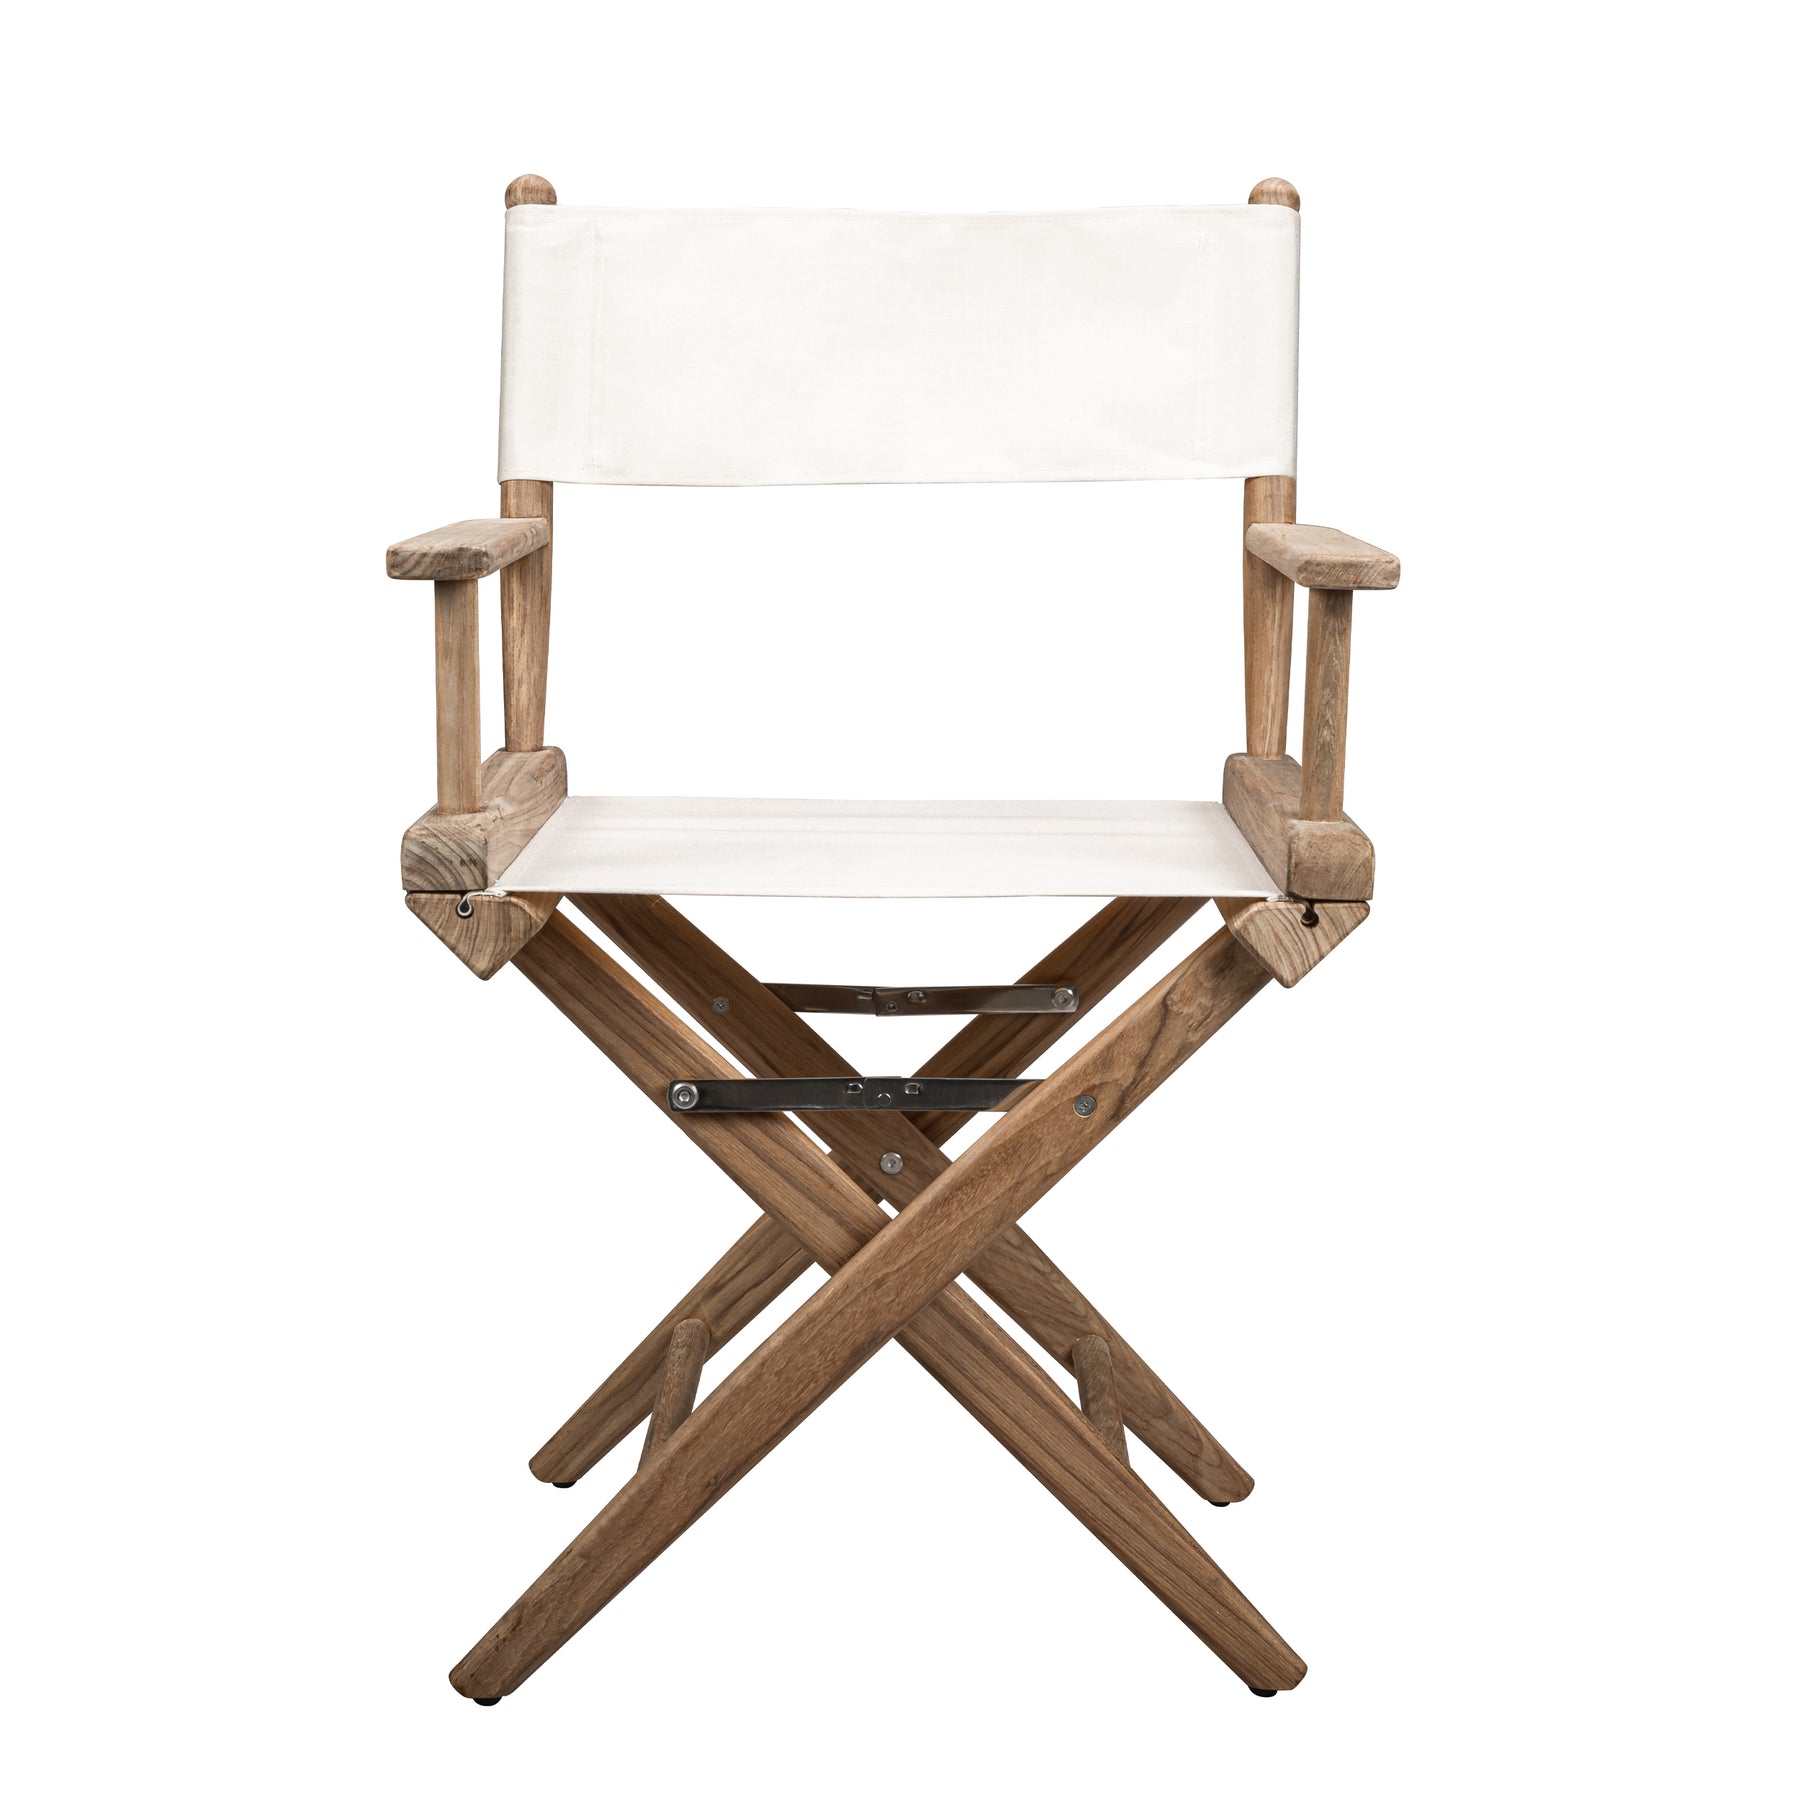 Directors Chair With Creme SUNBRELLA® Fabric Covers - Sanded Finish - 60044